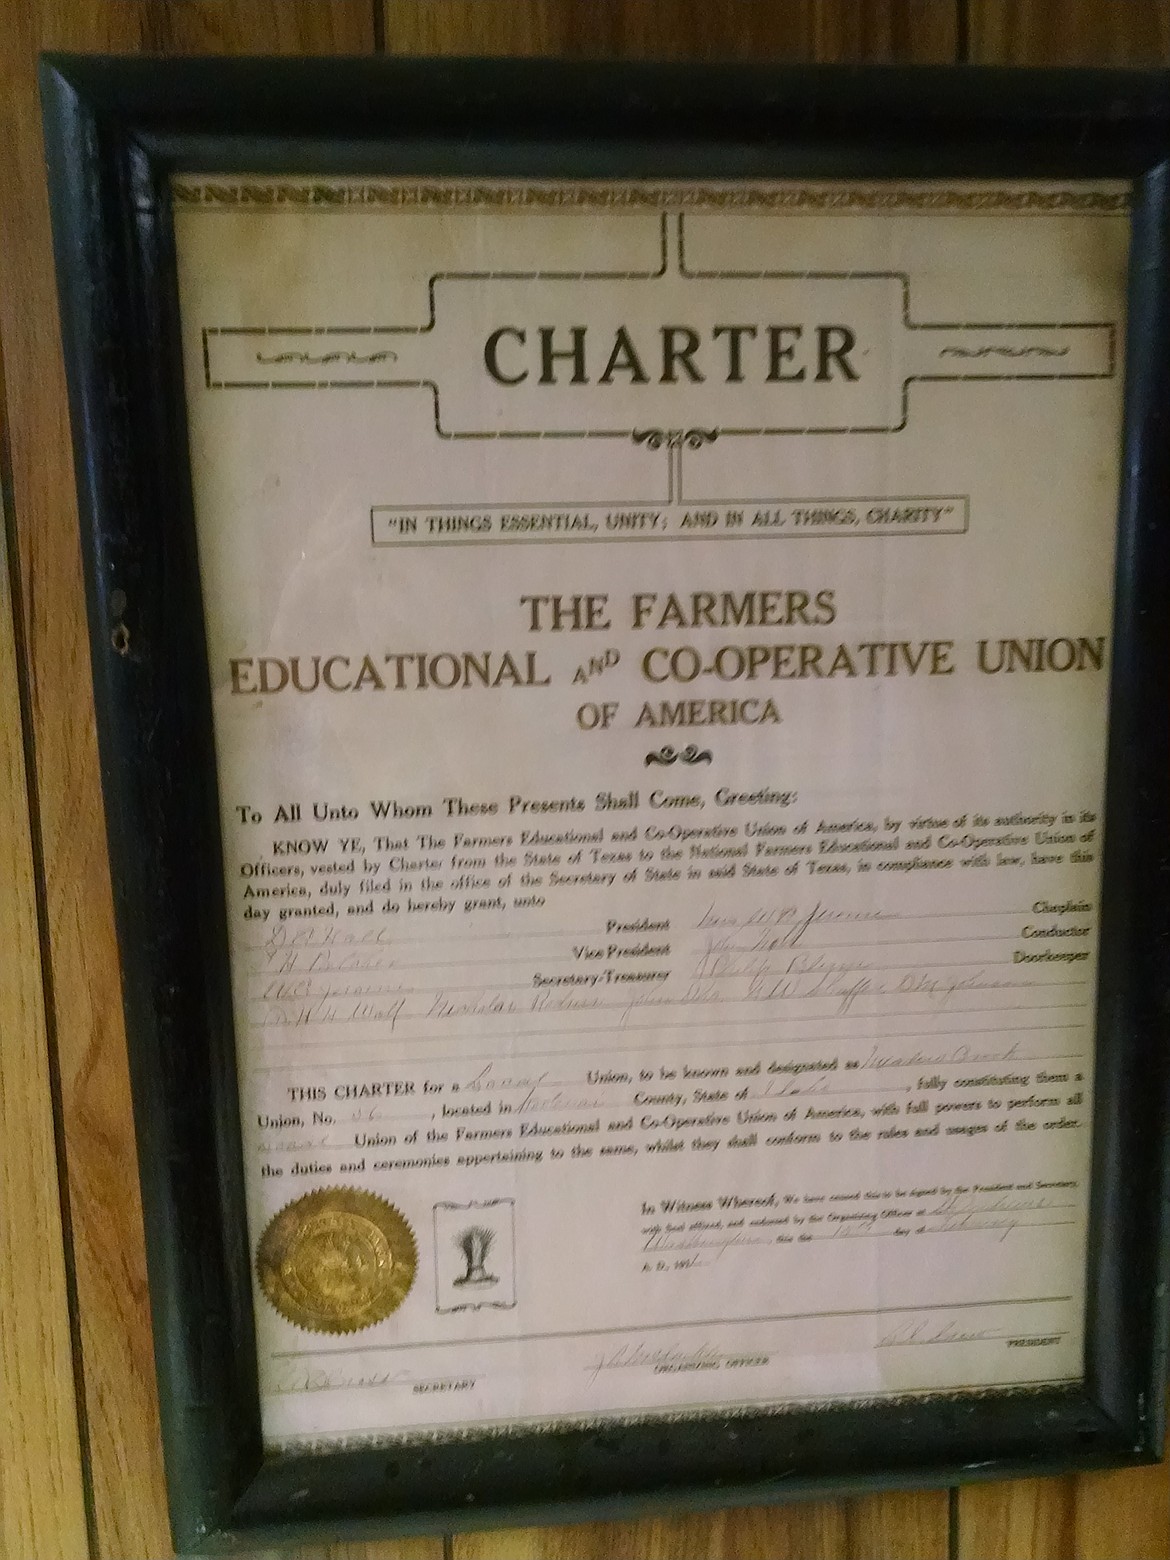 The 1912 Farmers and Educational and Co-operative Union of America charter that dissolved in 1968 is hung inside the Meadow Brook Community Hall. (BRIAN WALKER/Press)